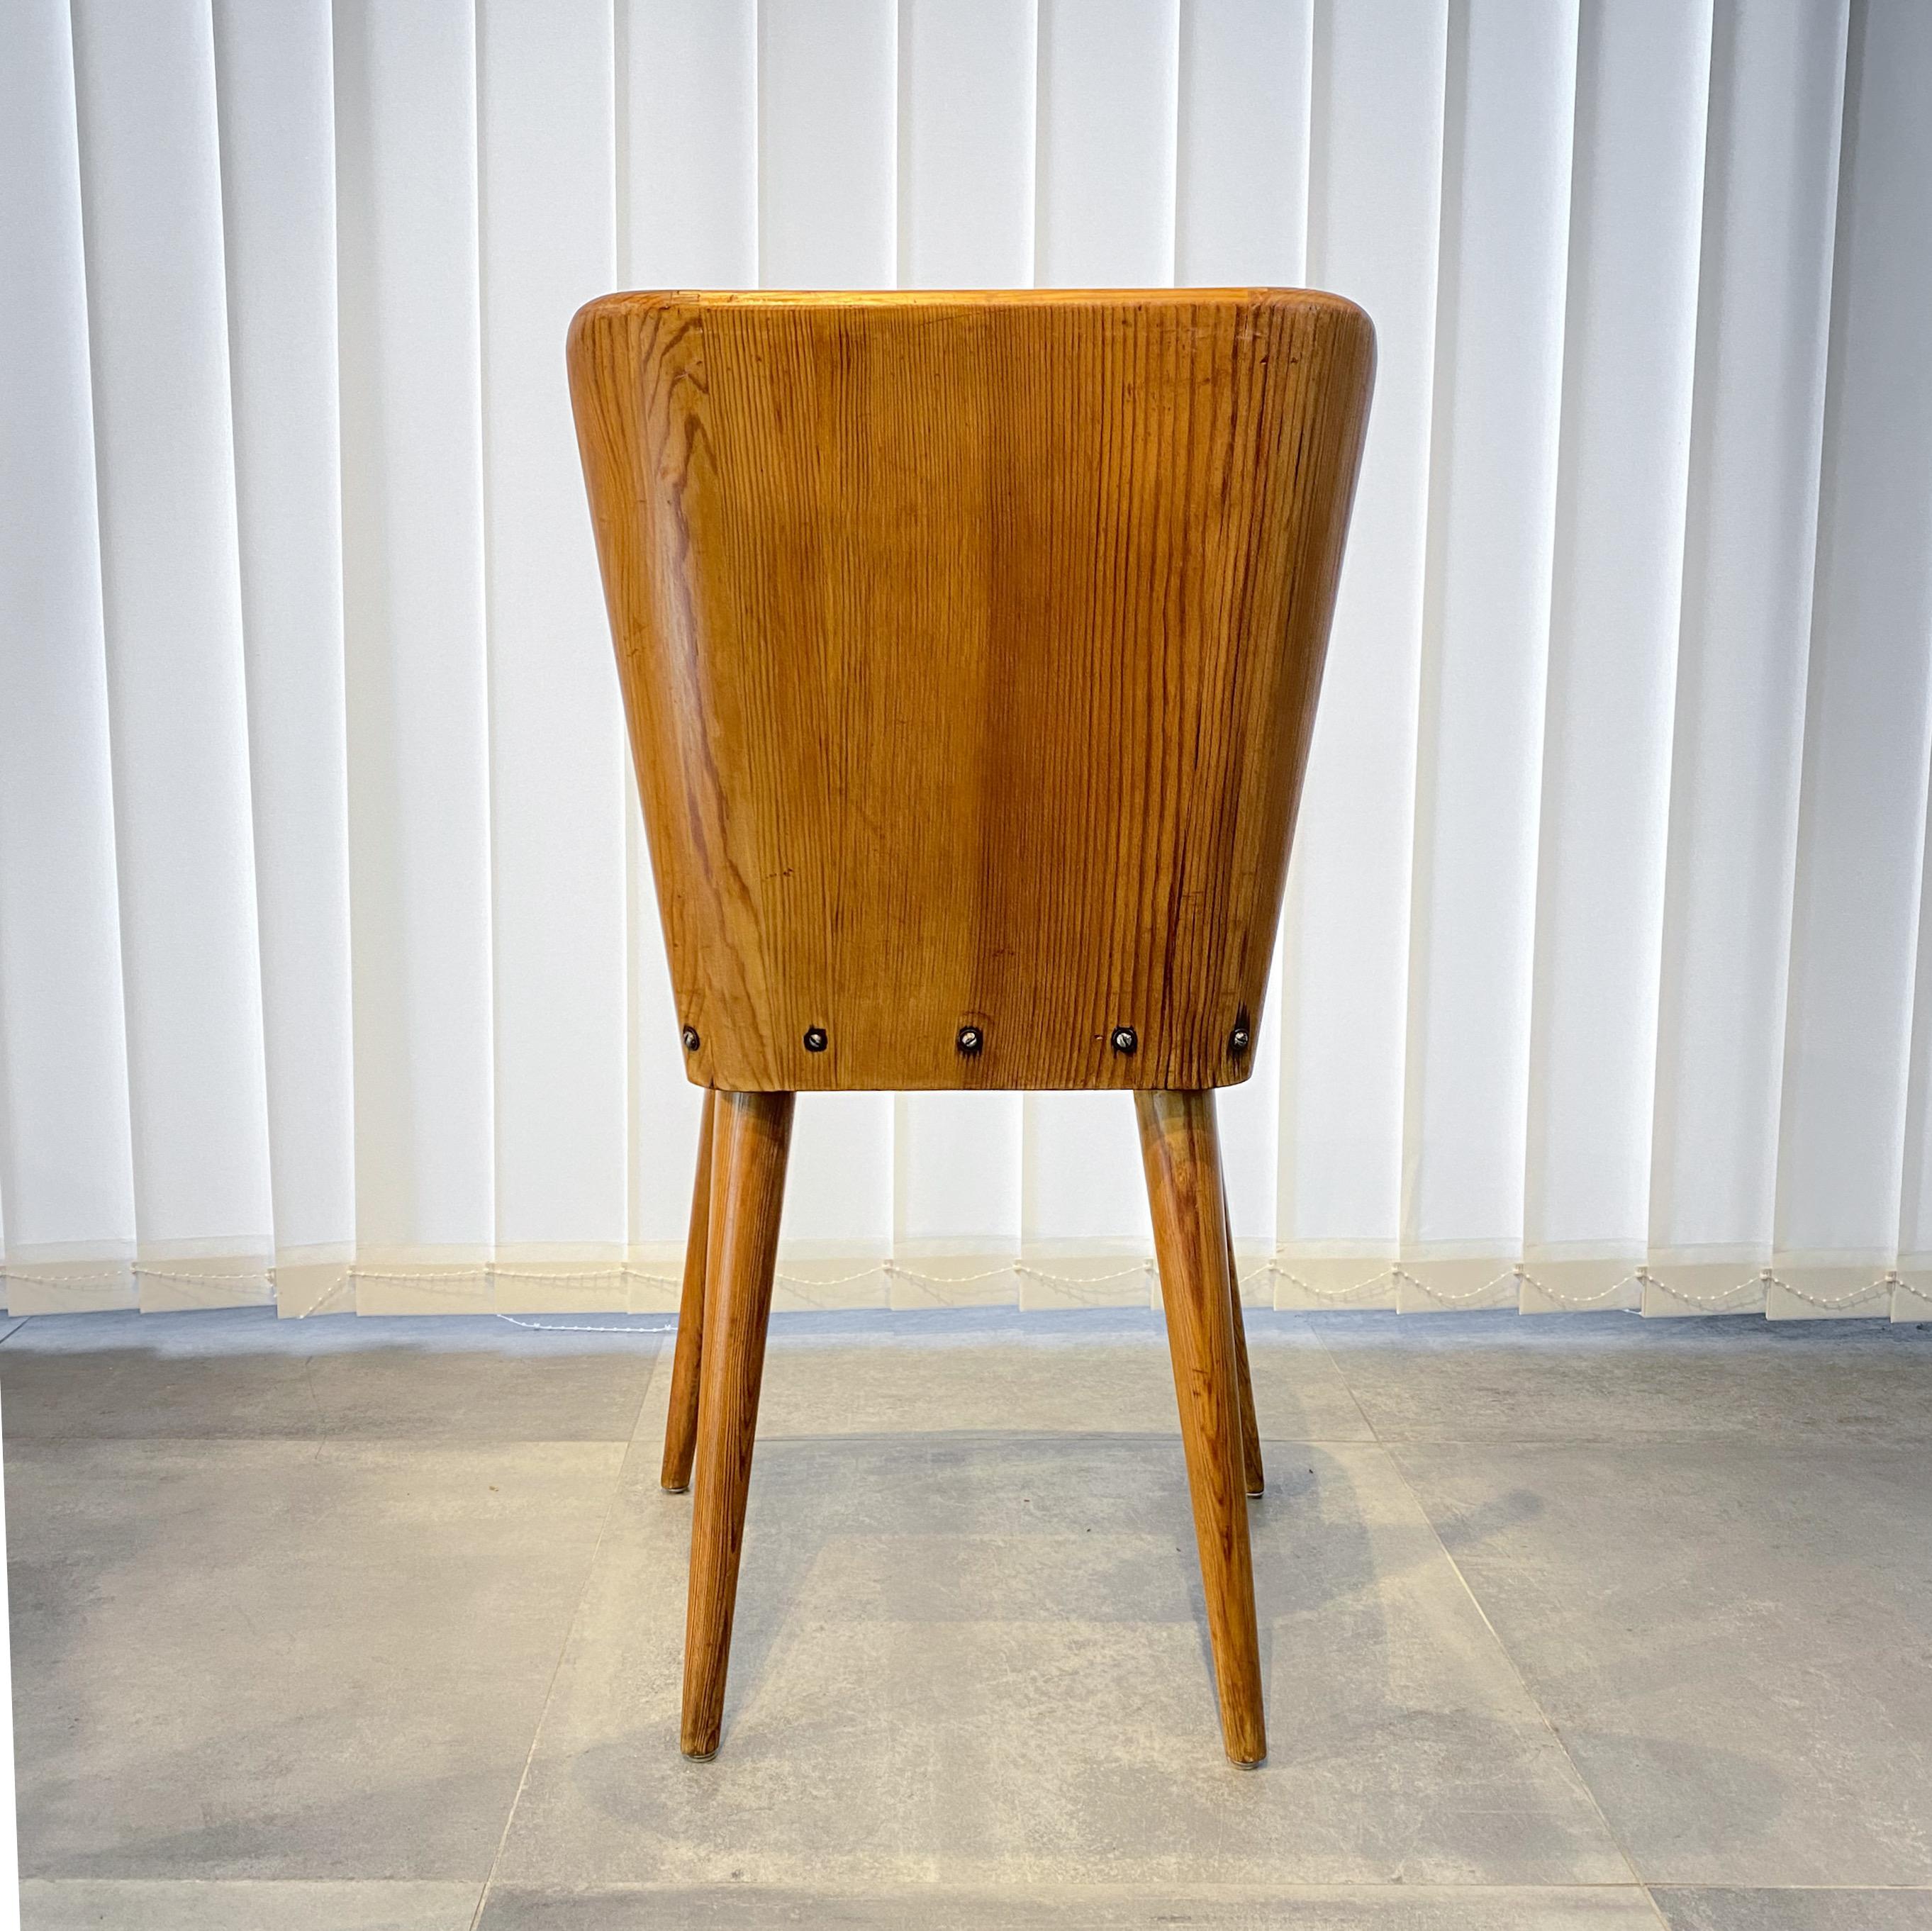 Göran Malmvall pine chair 510 by Karl Andersson & Söner, Sweden, 1940s In Good Condition For Sale In Forserum, SE